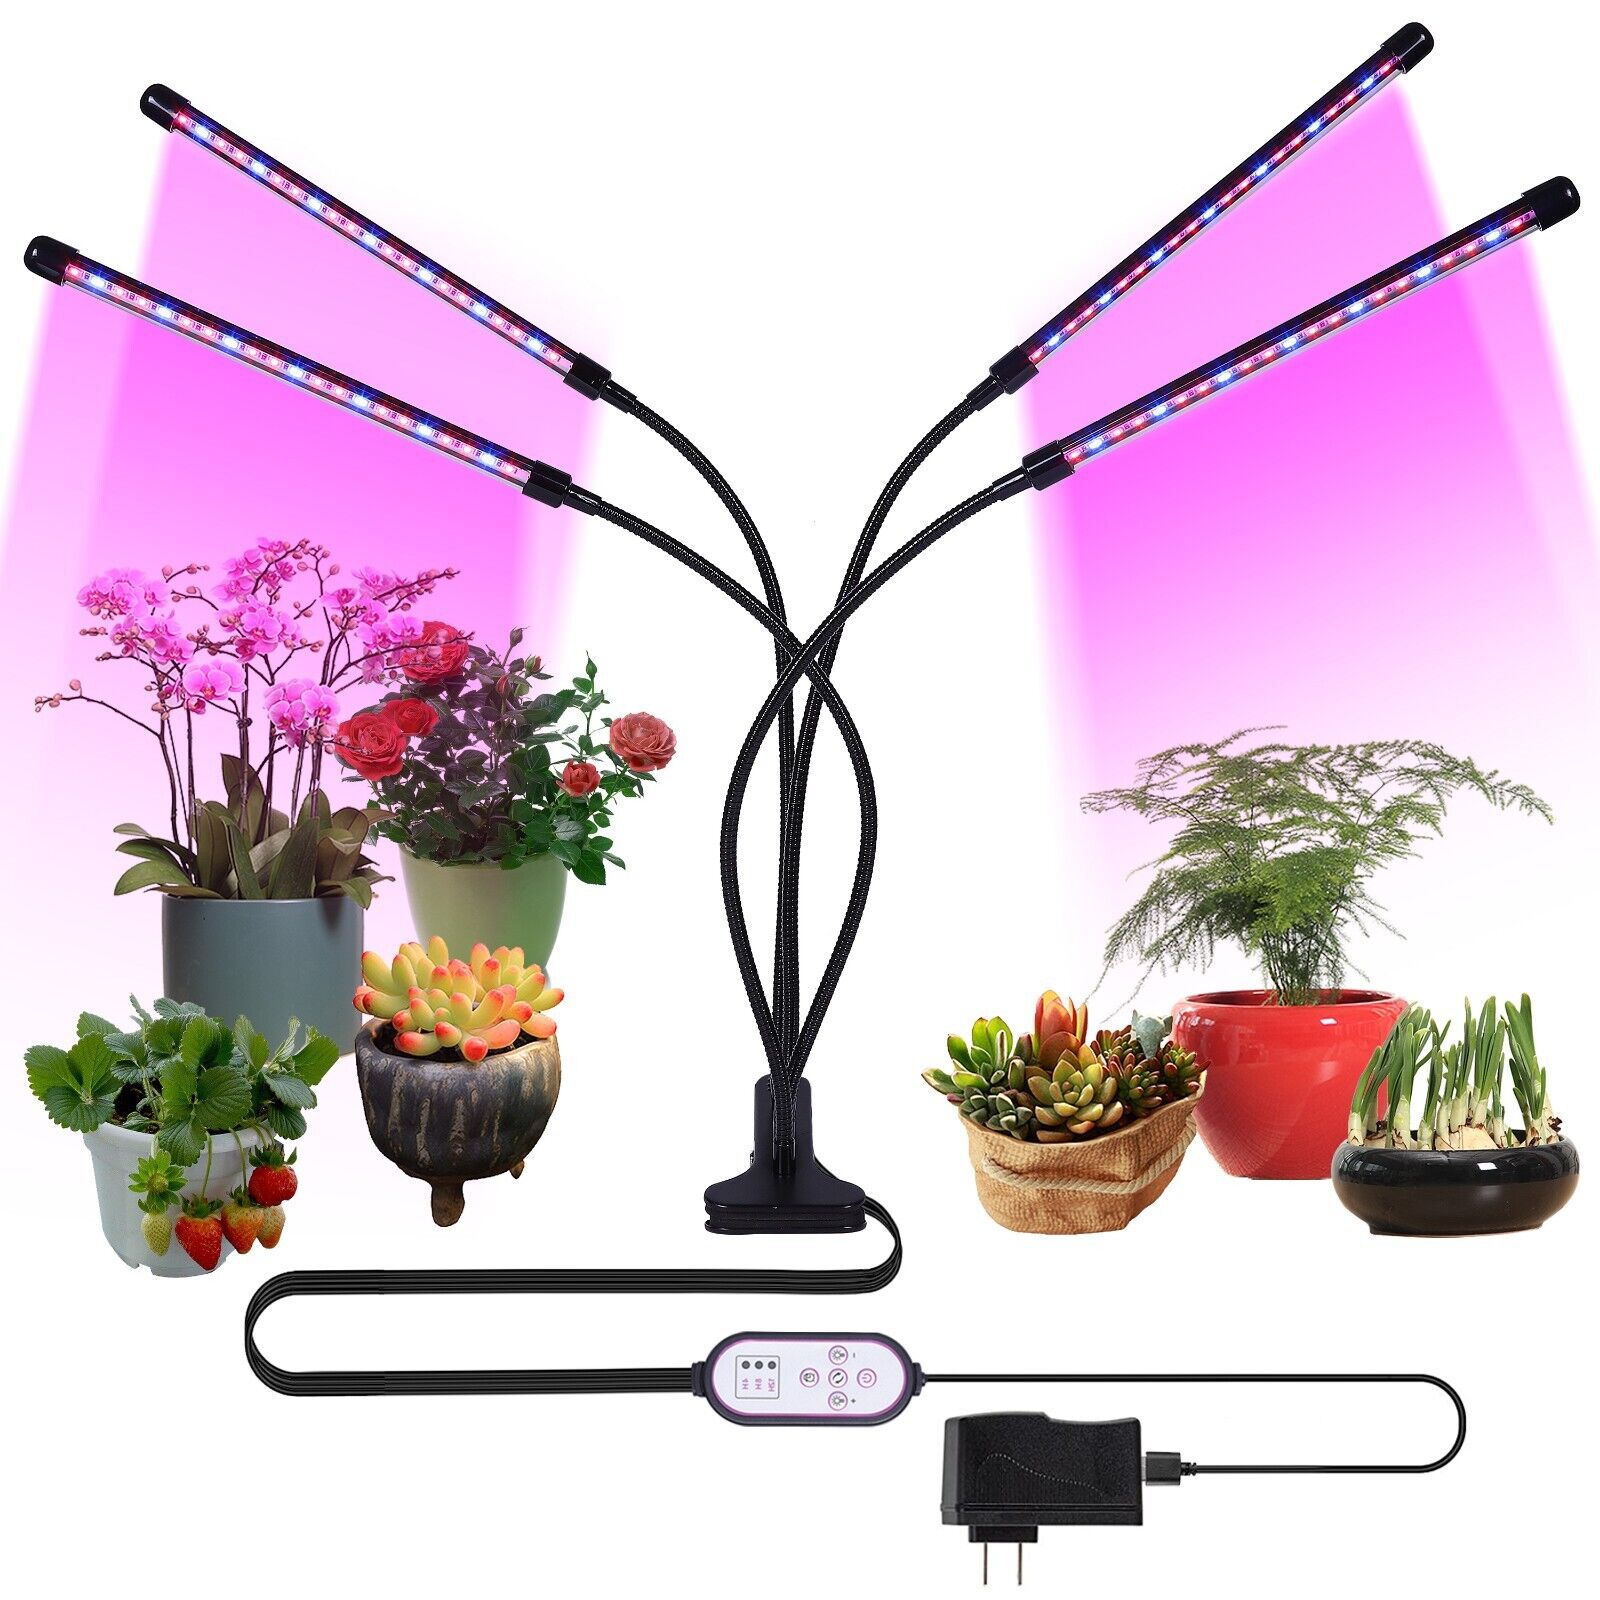 84 LEDs Grow Lights for Indoor Plants Hydroponics Full Spectrum Light with Clip